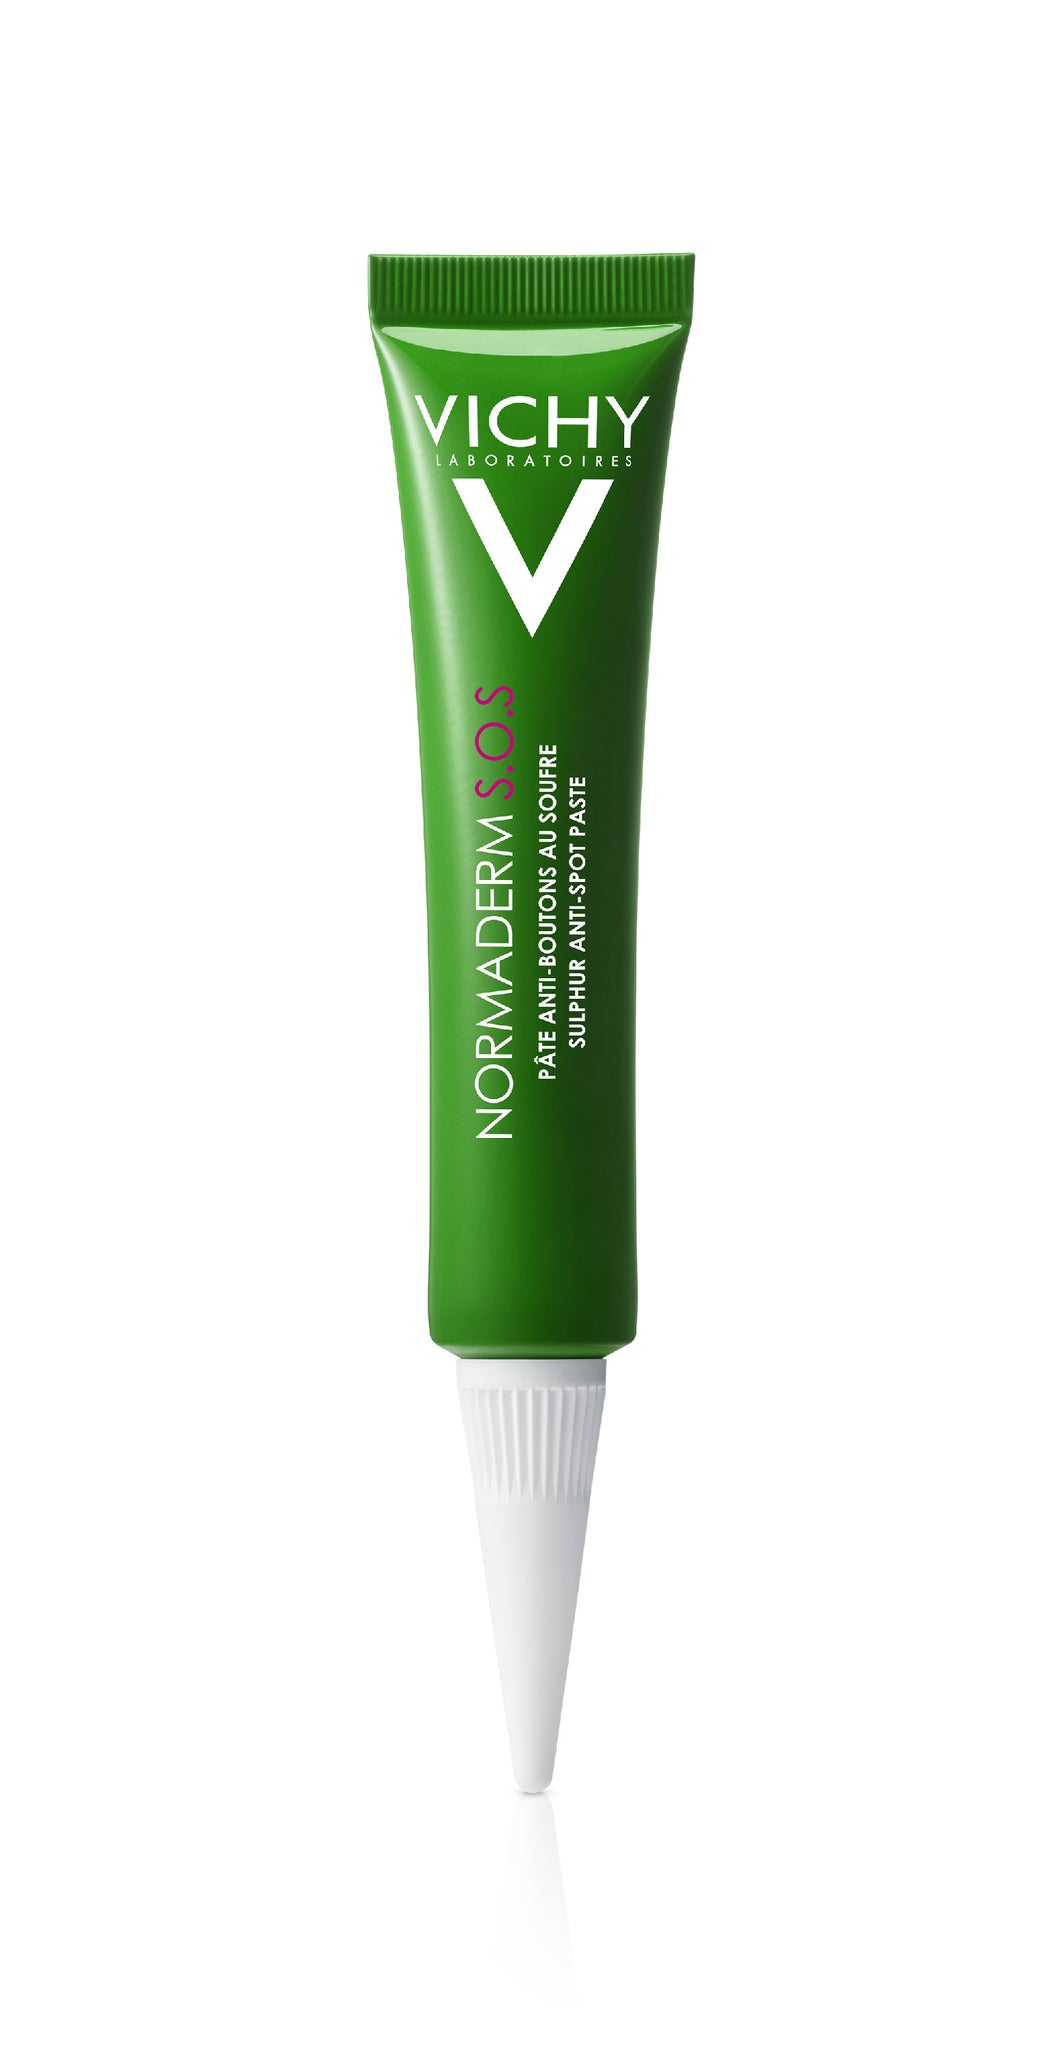 Vichy Normaderm Phytosolution S.O.S. Anti-onzuiverheden 20ml